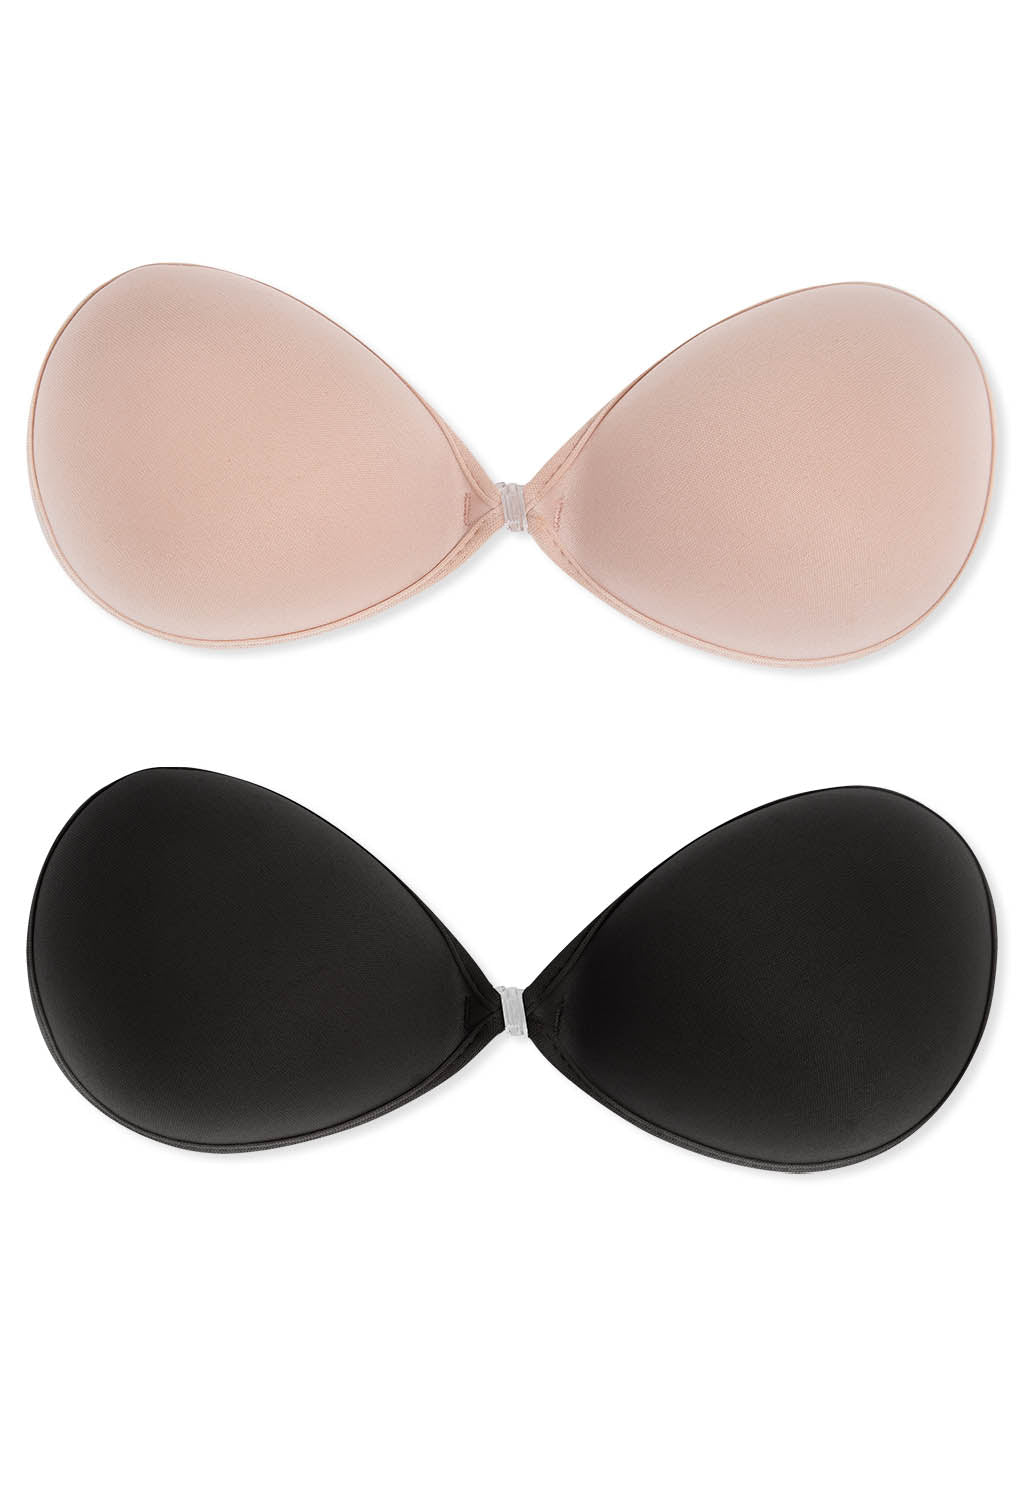 Cup Push-up breast pads for bras, dresses, tops and swimwear - Pair